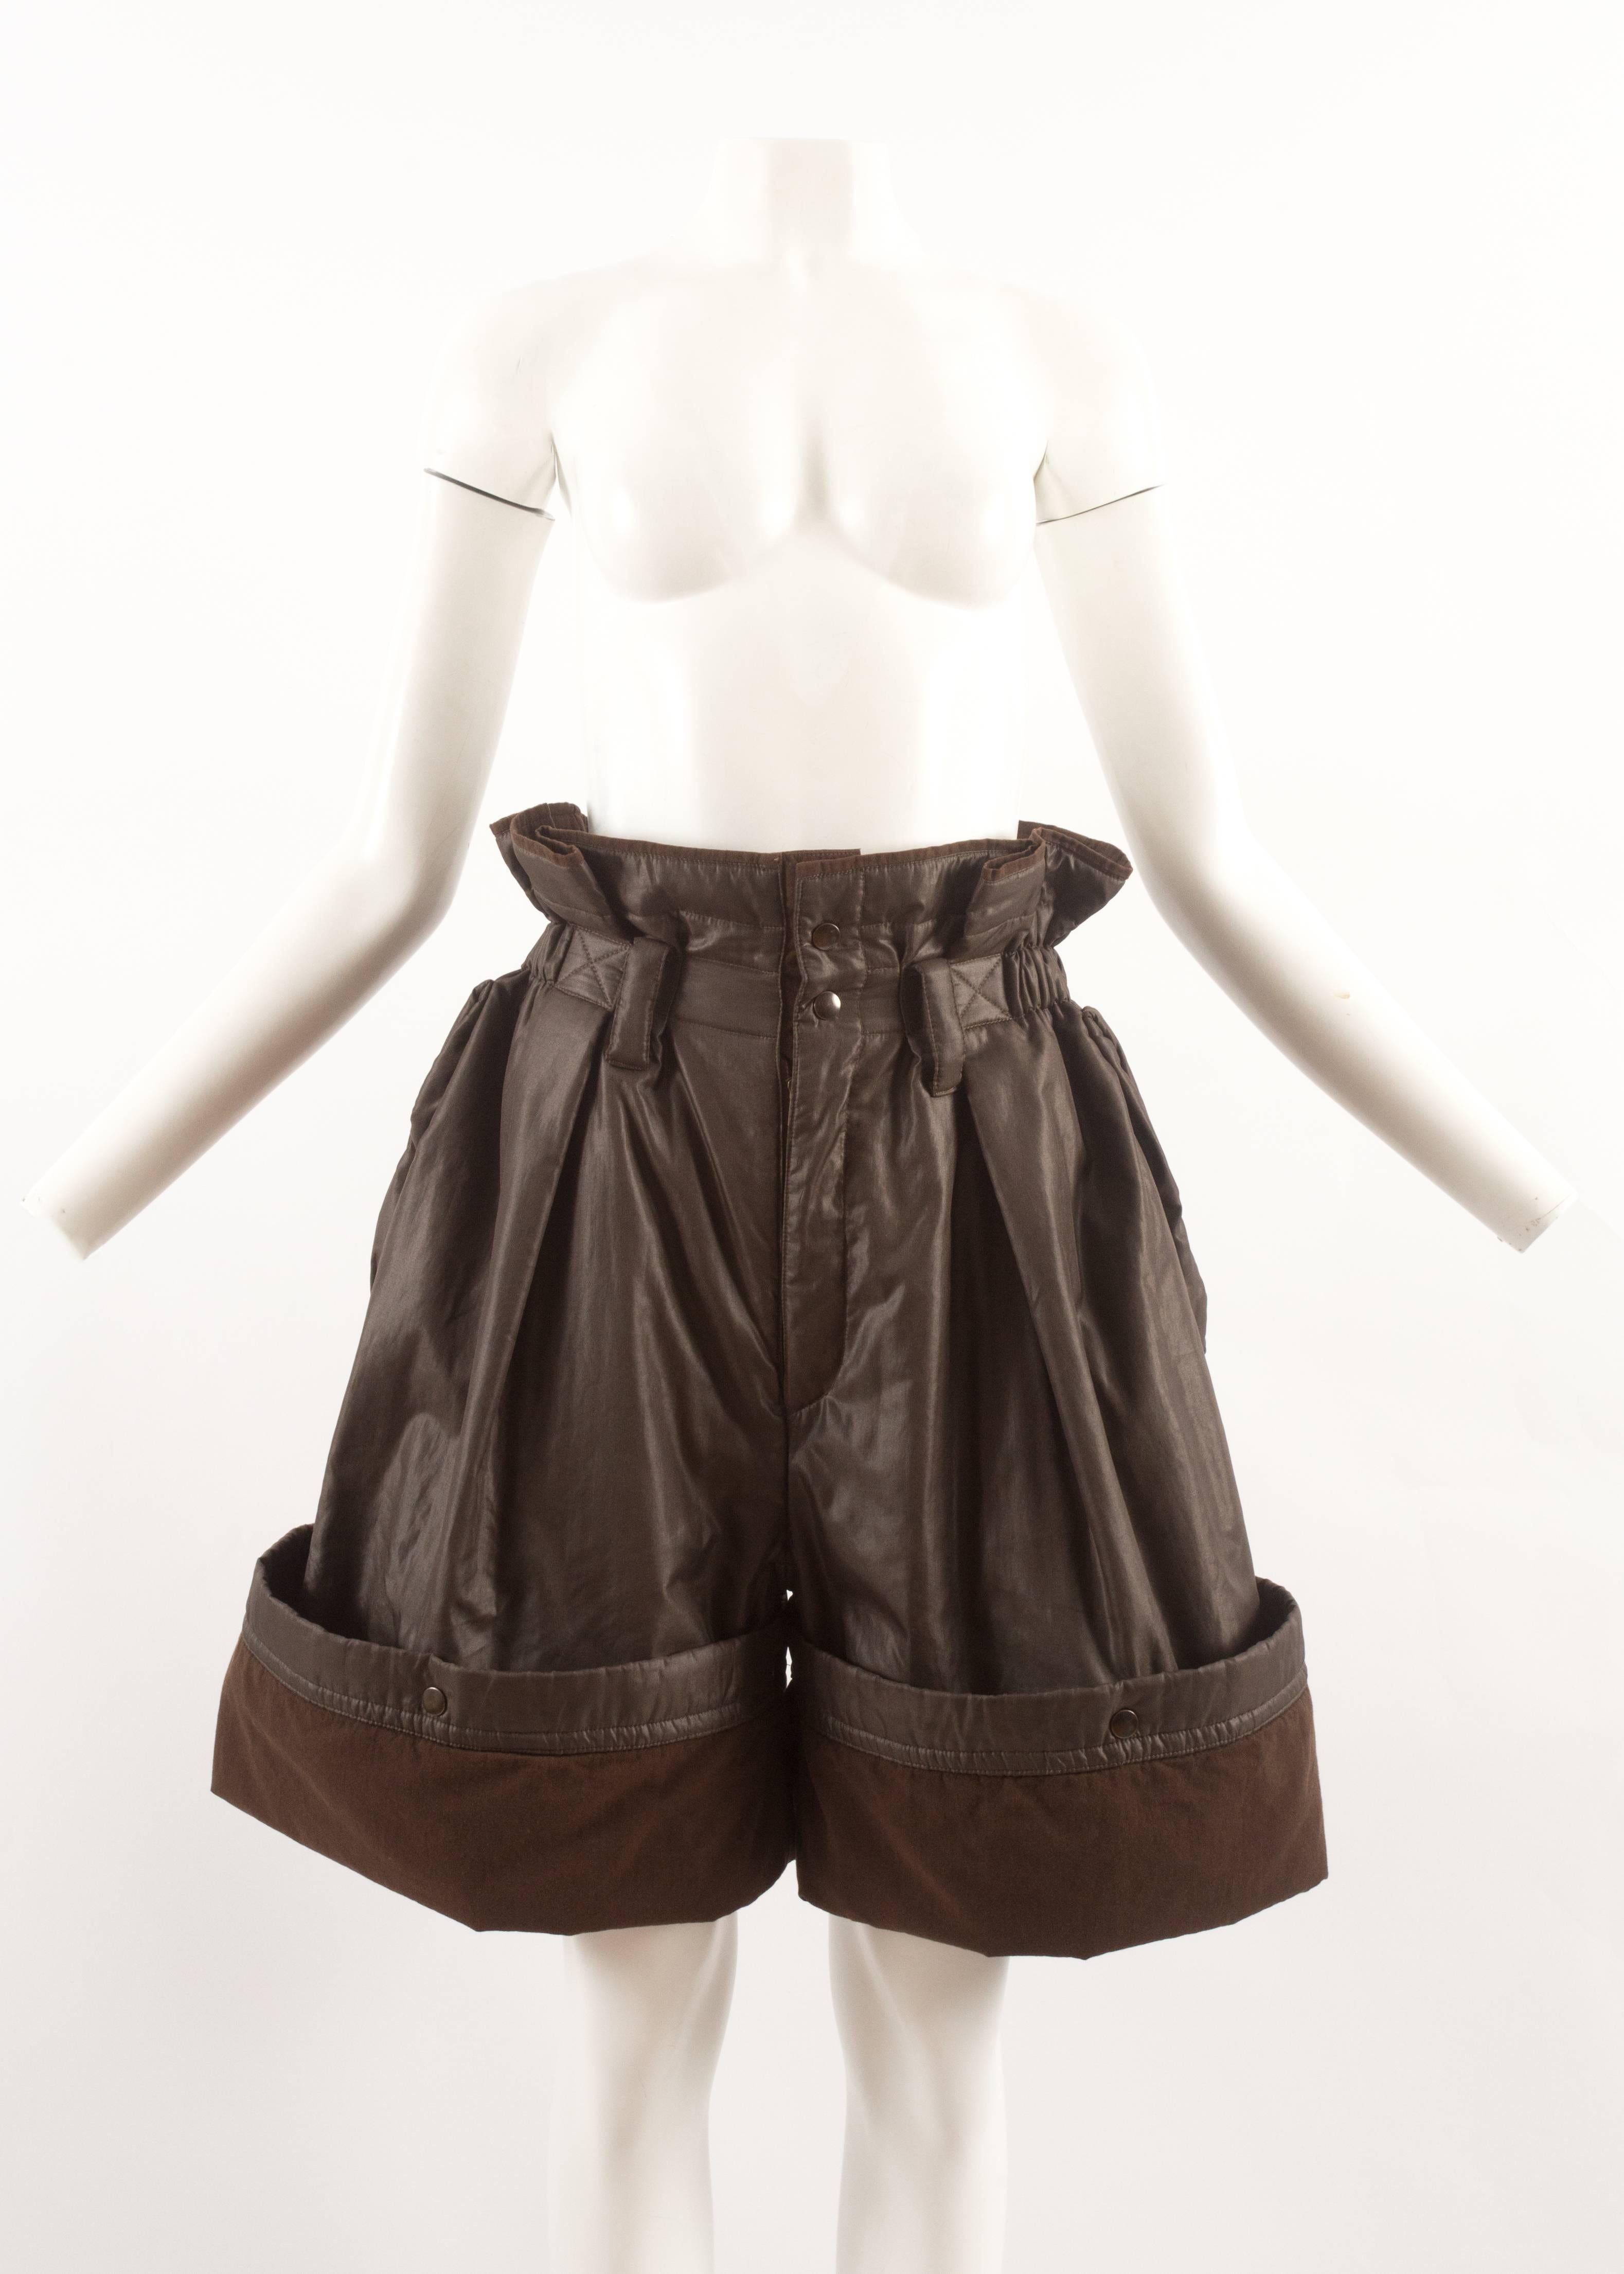 Issey Miyake Autumn-Winter 1983 oversized nylon shorts with paper-bag elastic waist, two side pockets and snap button closures on the hem to lengthen or shorten.